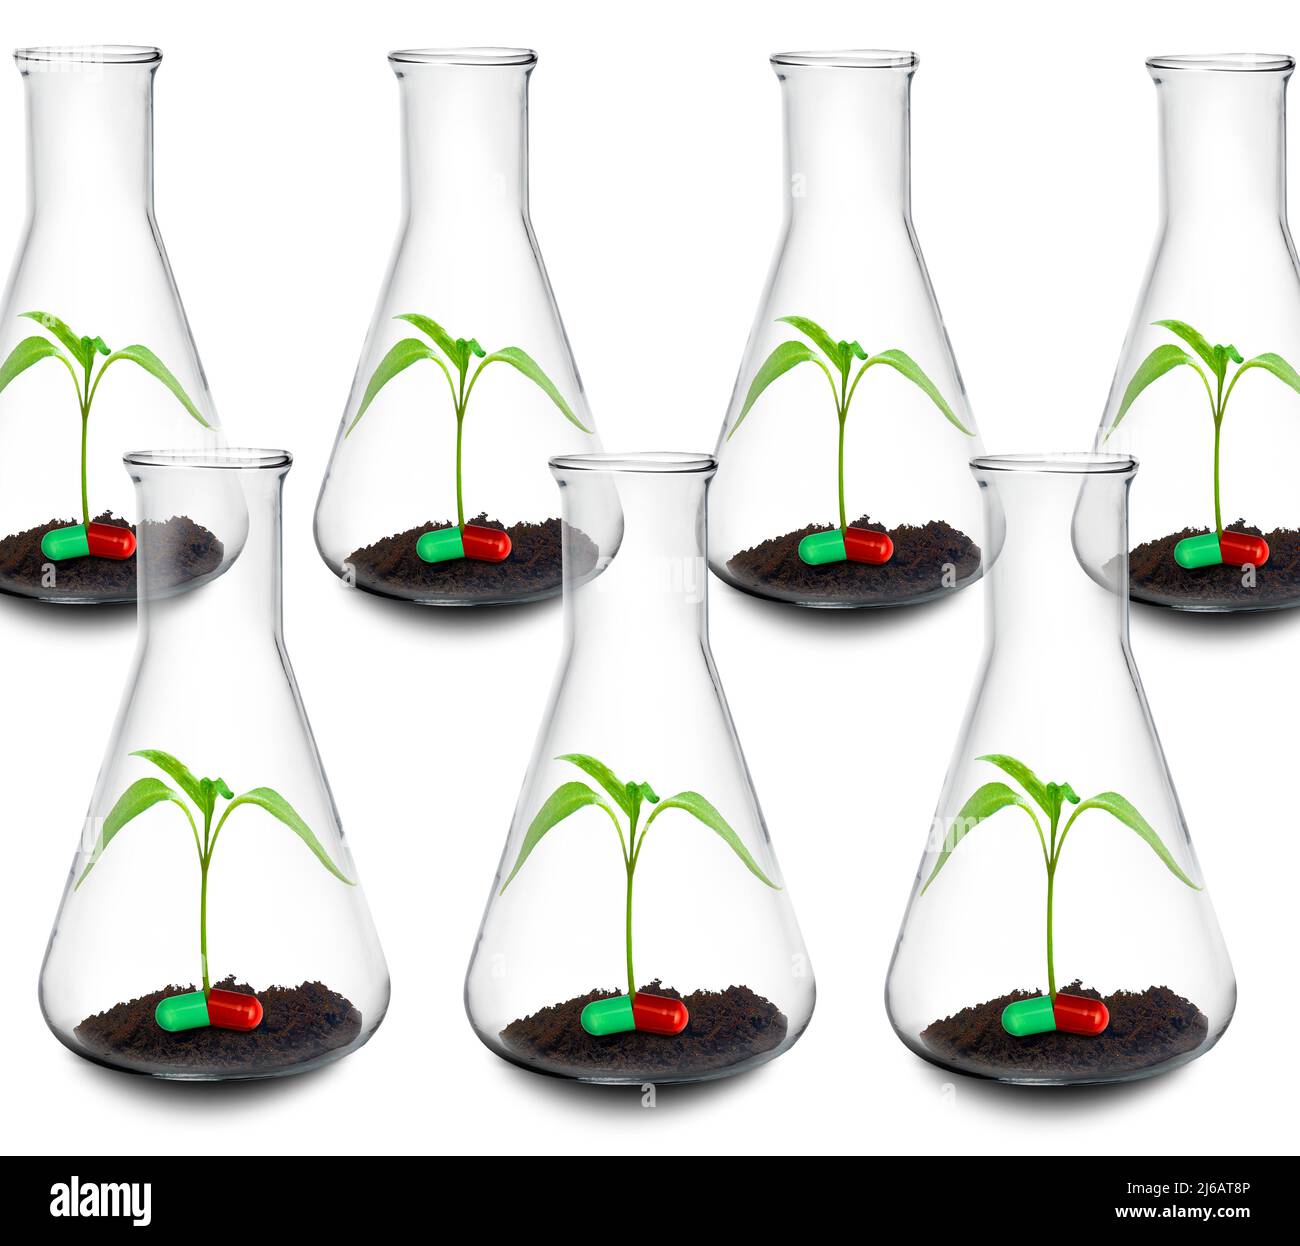 Botanical research to find new medications, conceptual image Stock Photo